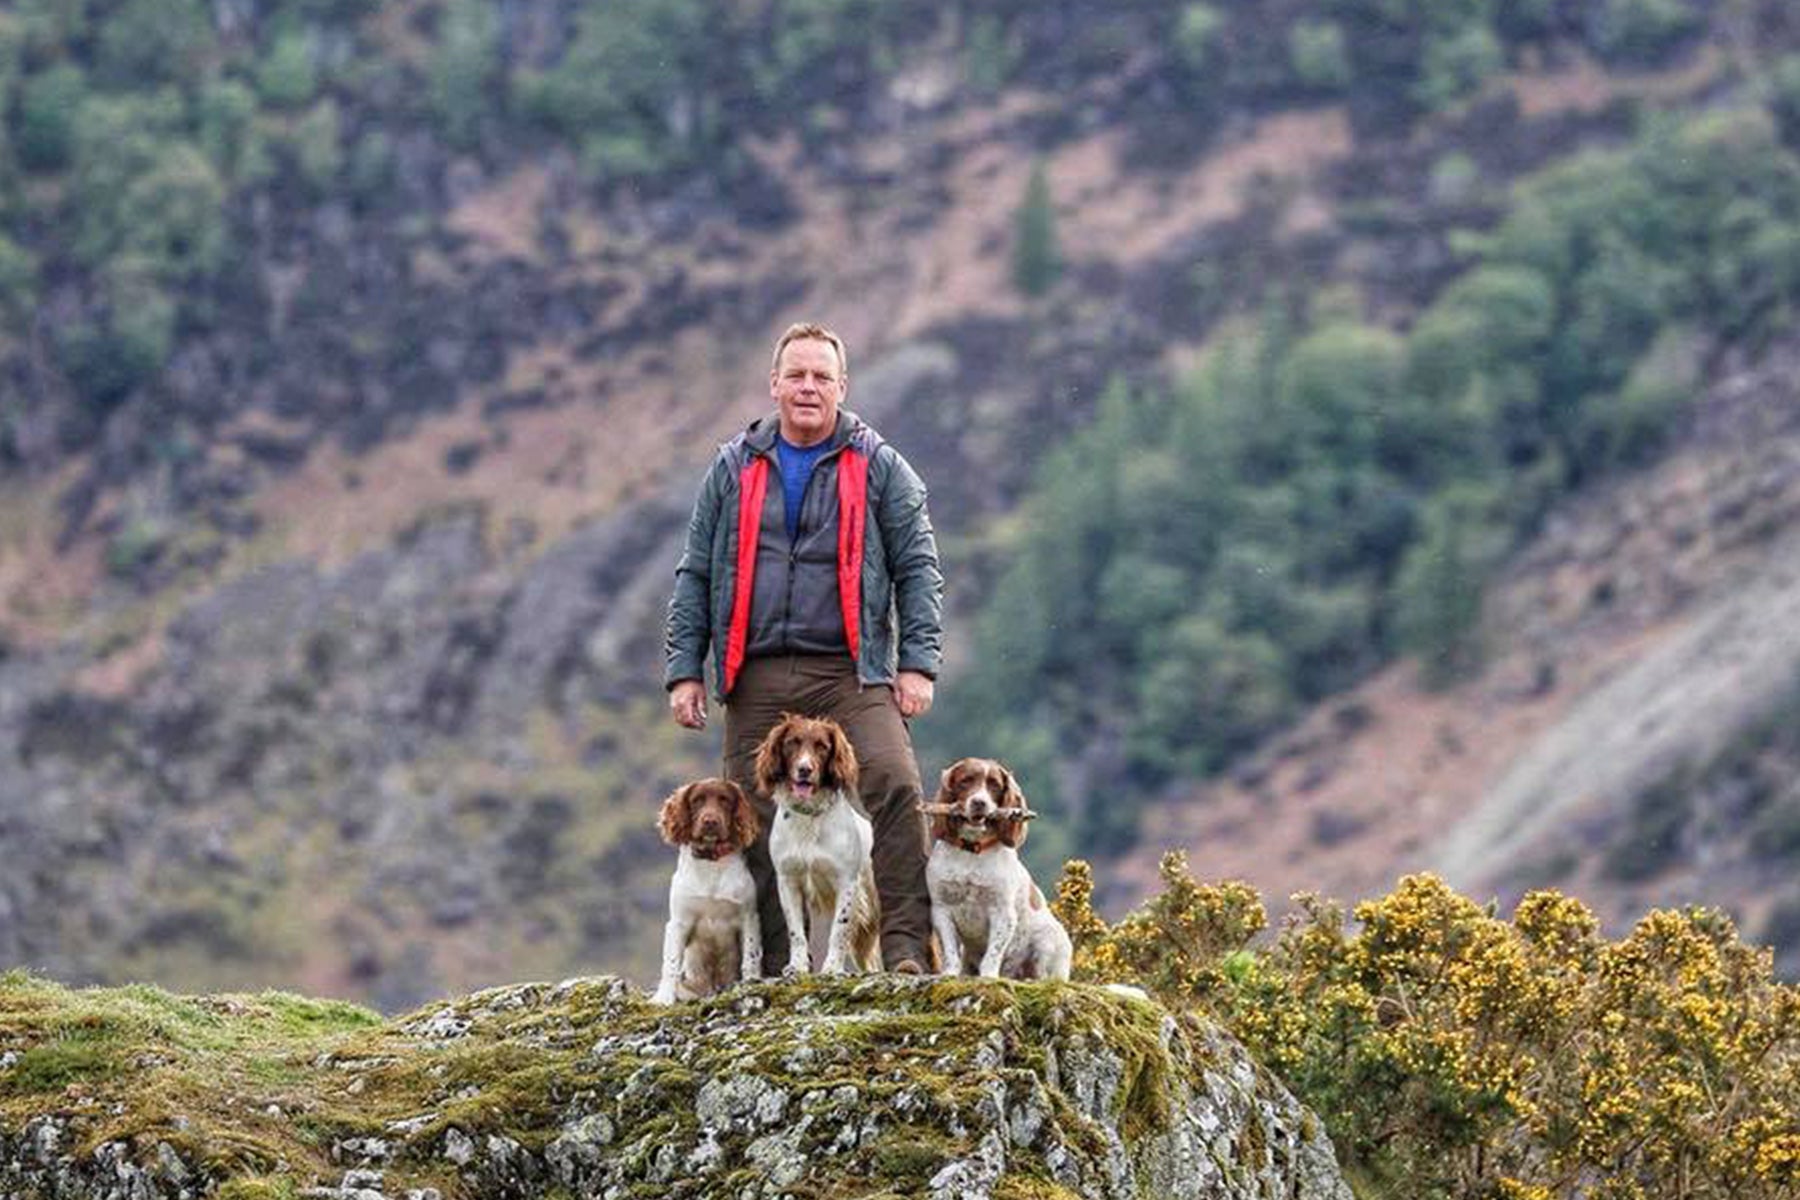 Kerry and his three dogs.